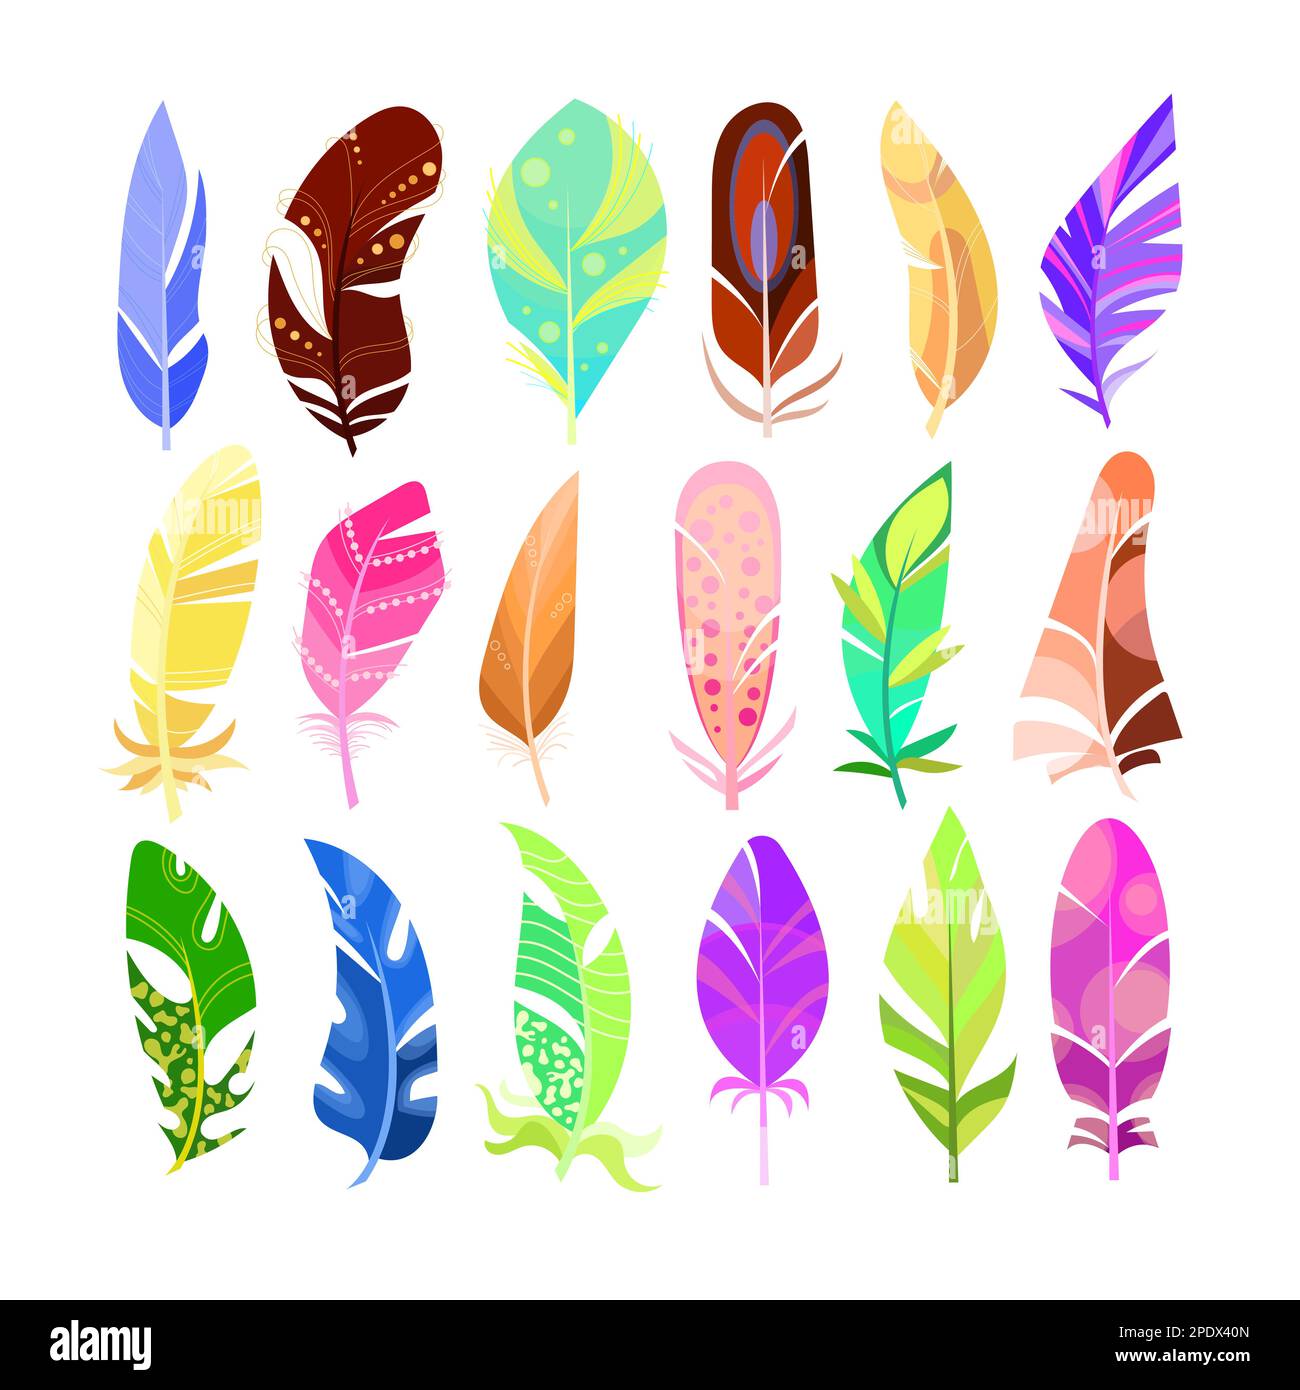 Various colorful birds feathers cartoon illustration collection Stock Vector